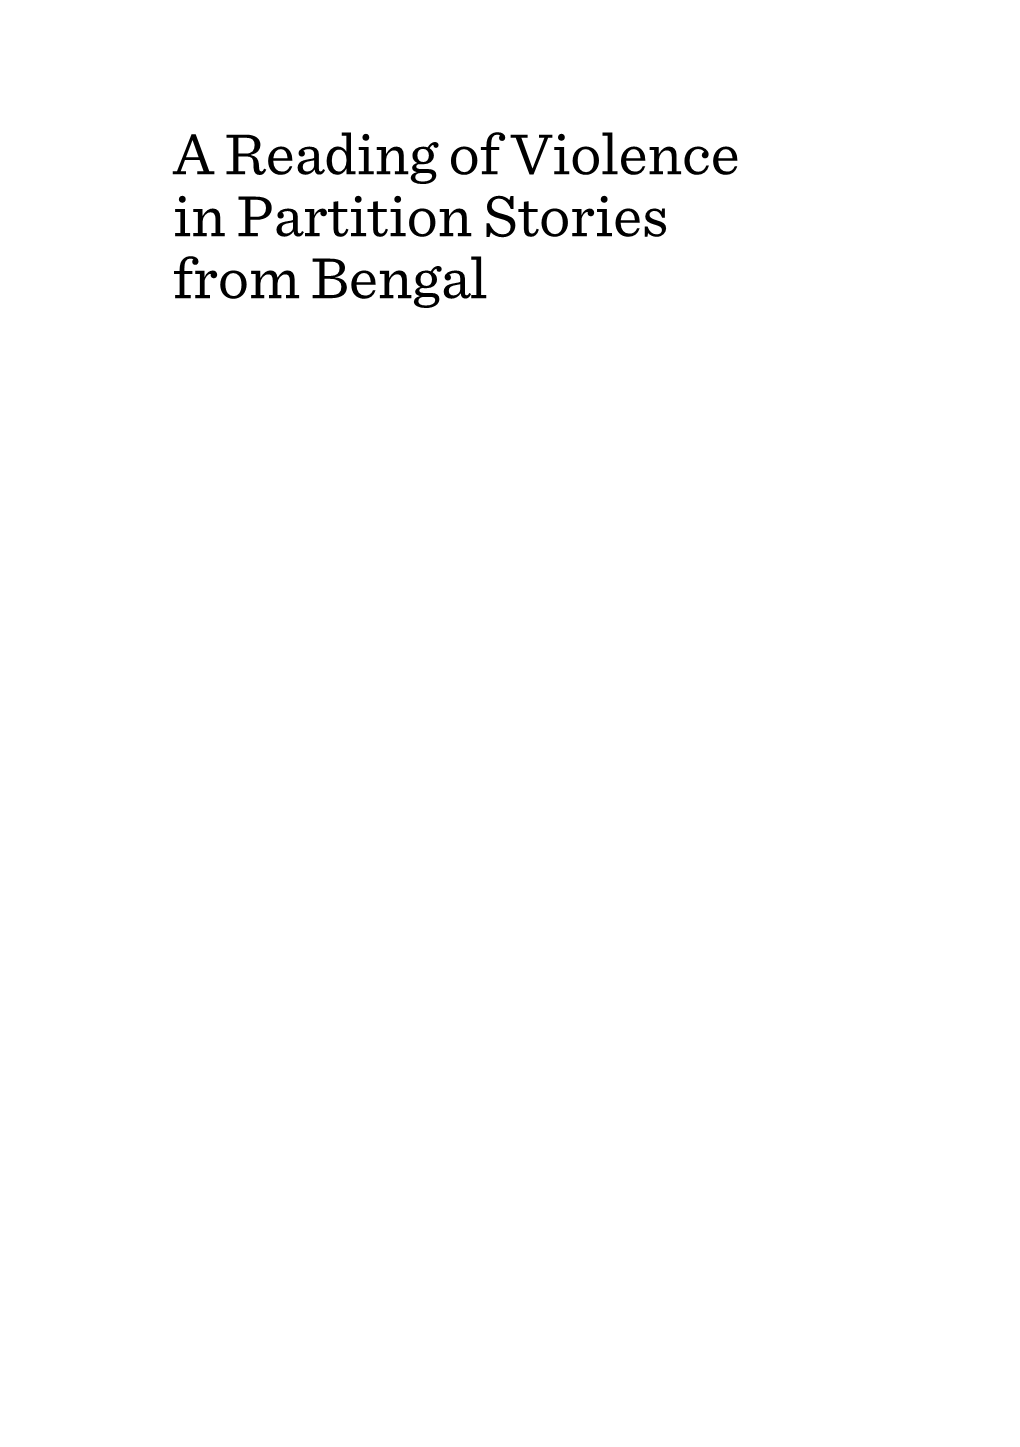 A Reading of Violence in Partition Stories from Bengal